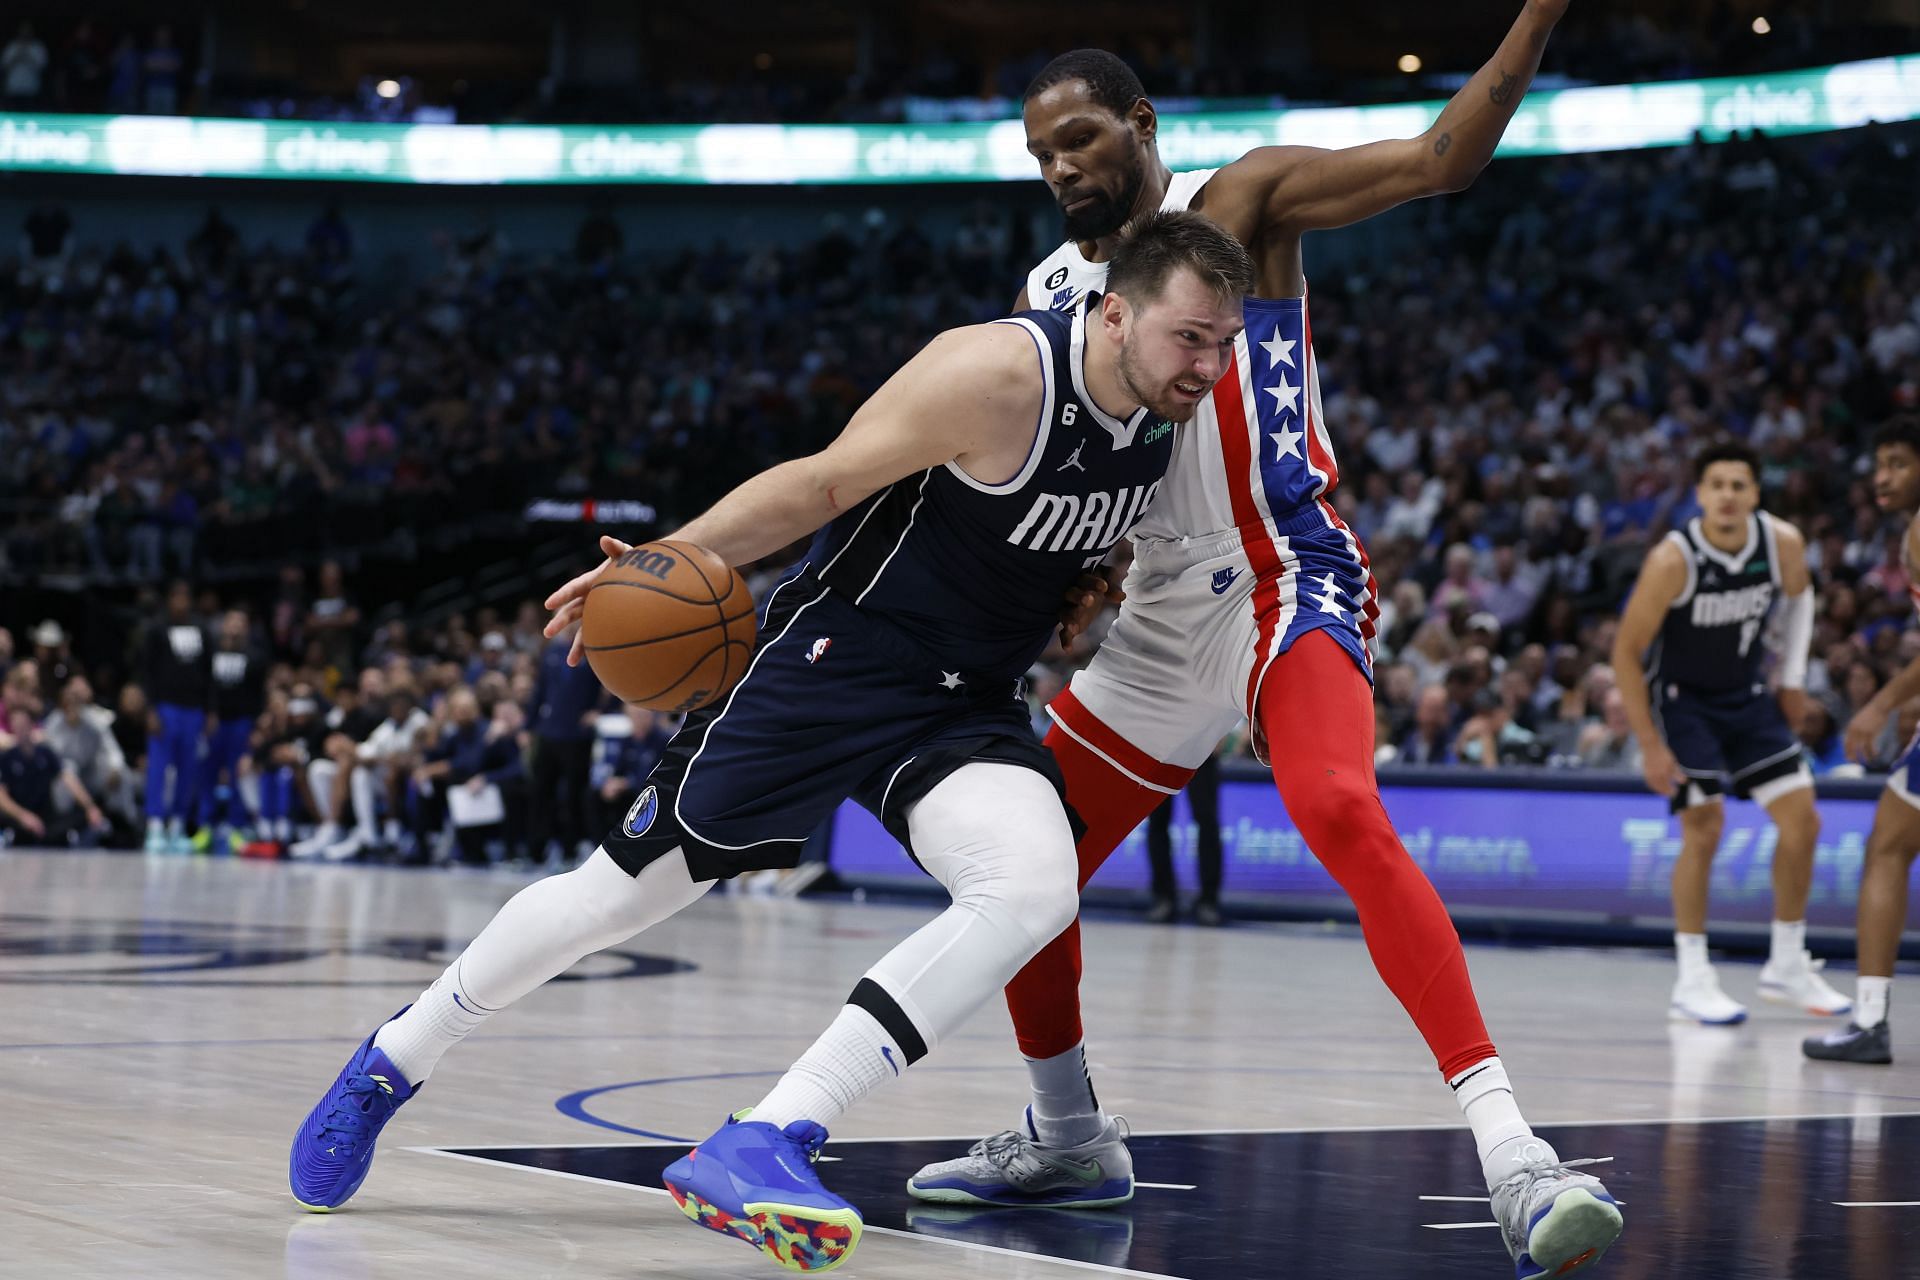 Luka Doncic of the Dallas Mavericks drives to the basket against Kevin Durant of the Brooklyn Nets